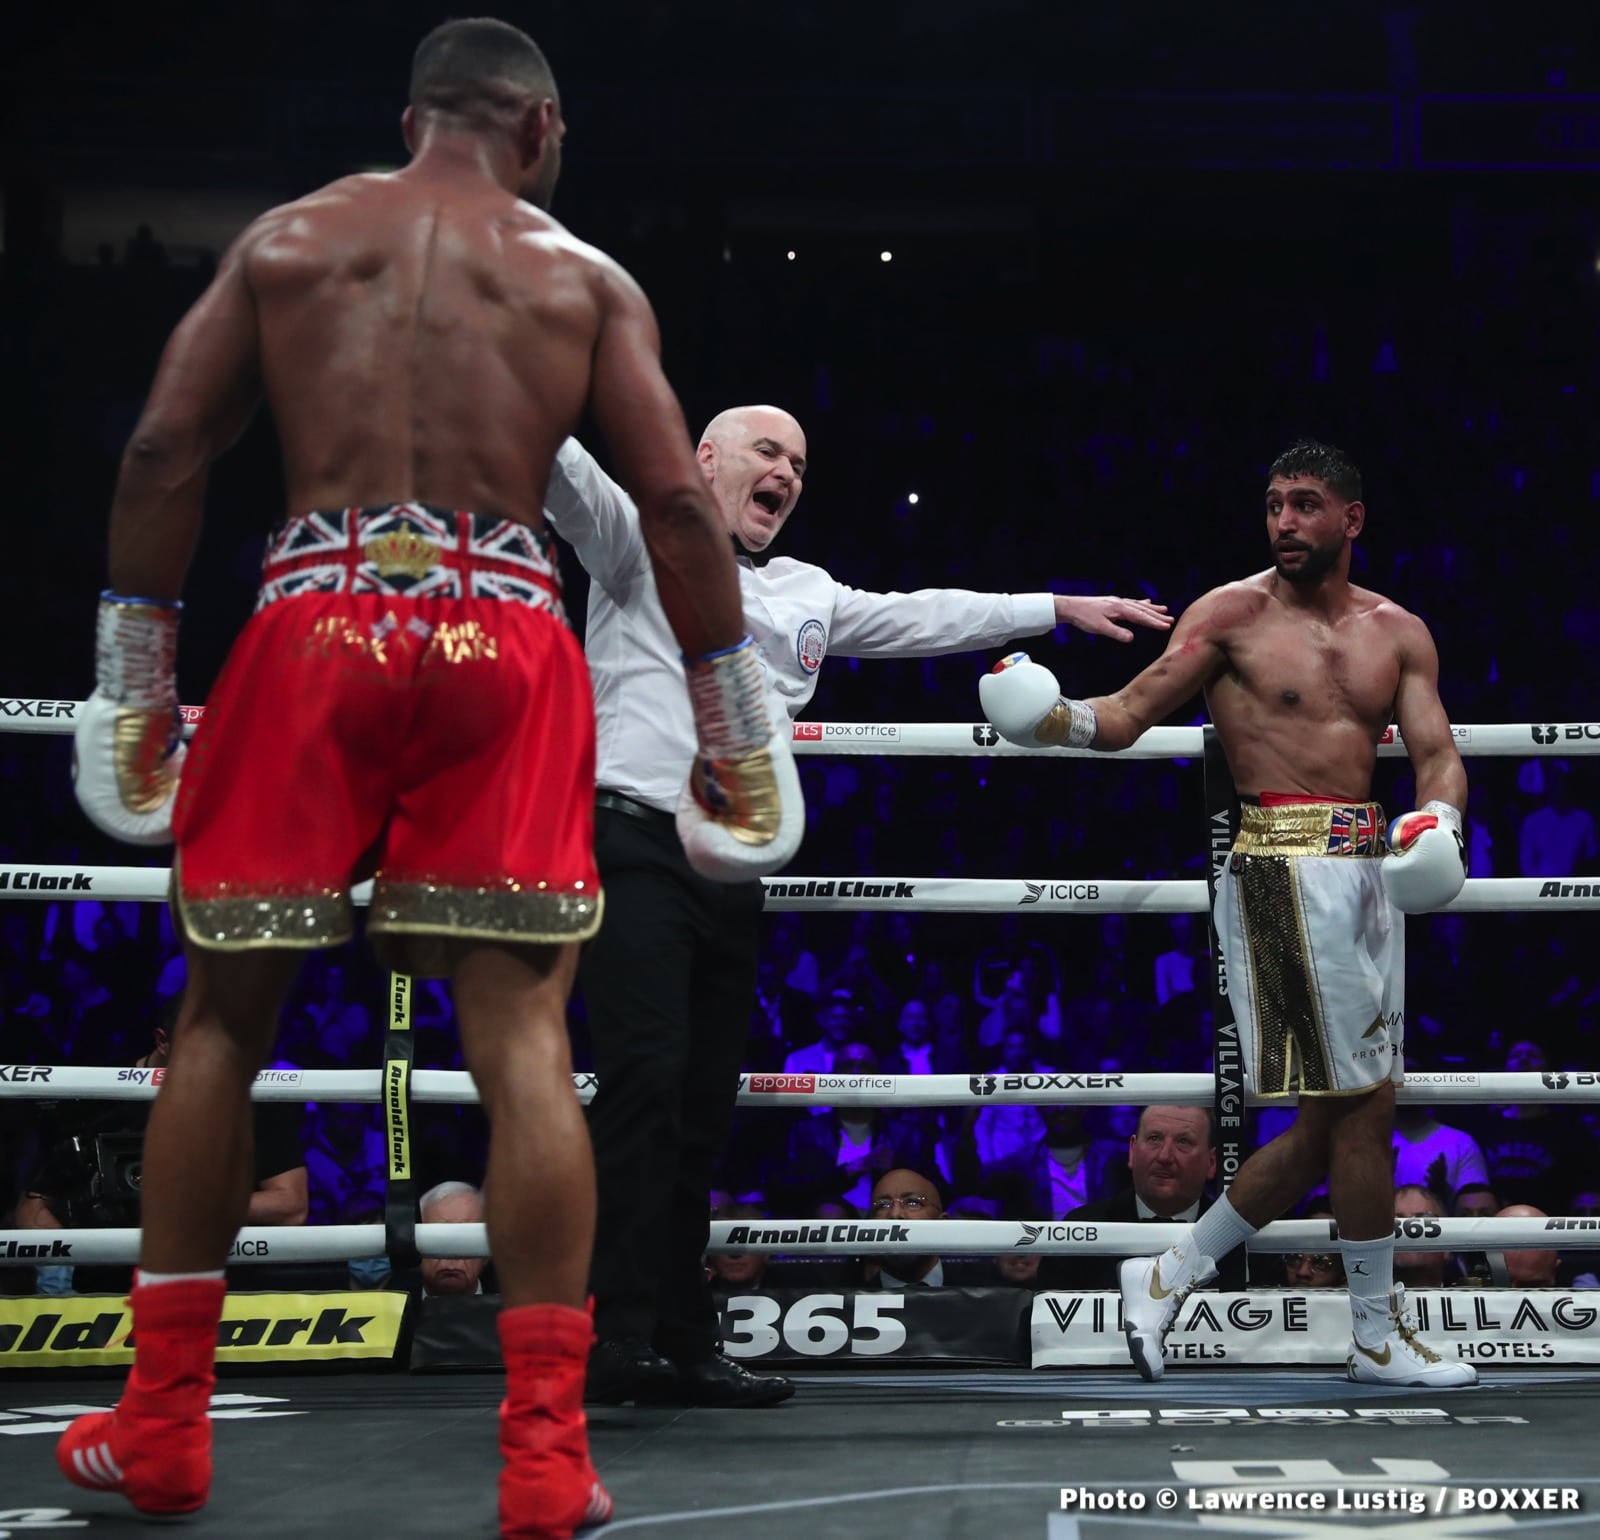 Image: Results / Photos: Brook beats Khan by 6th round TKO